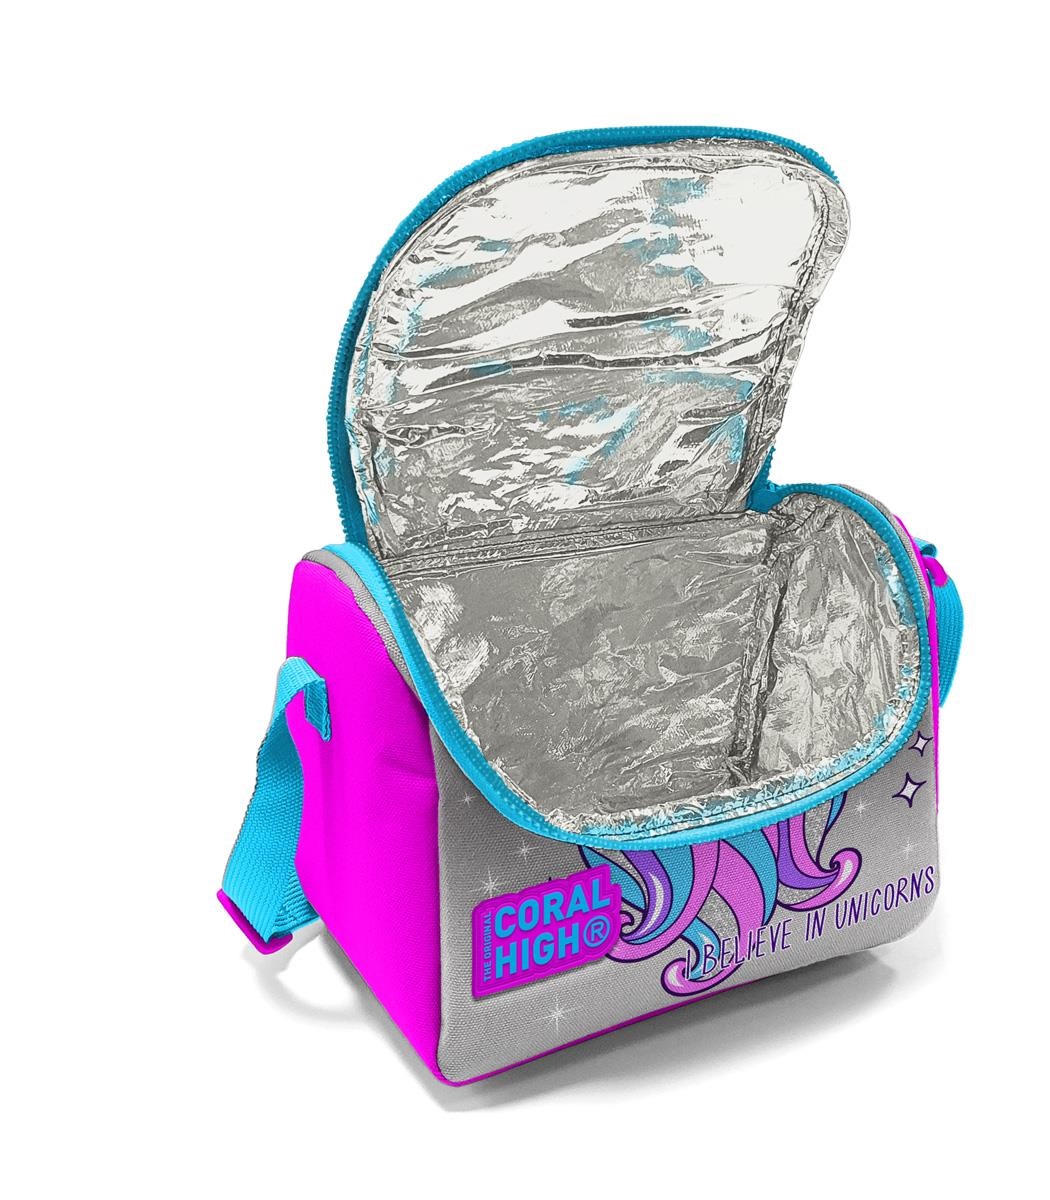 Coral High Kids Thermal Lunch Bag - Pink Silver Unicorn Patterned